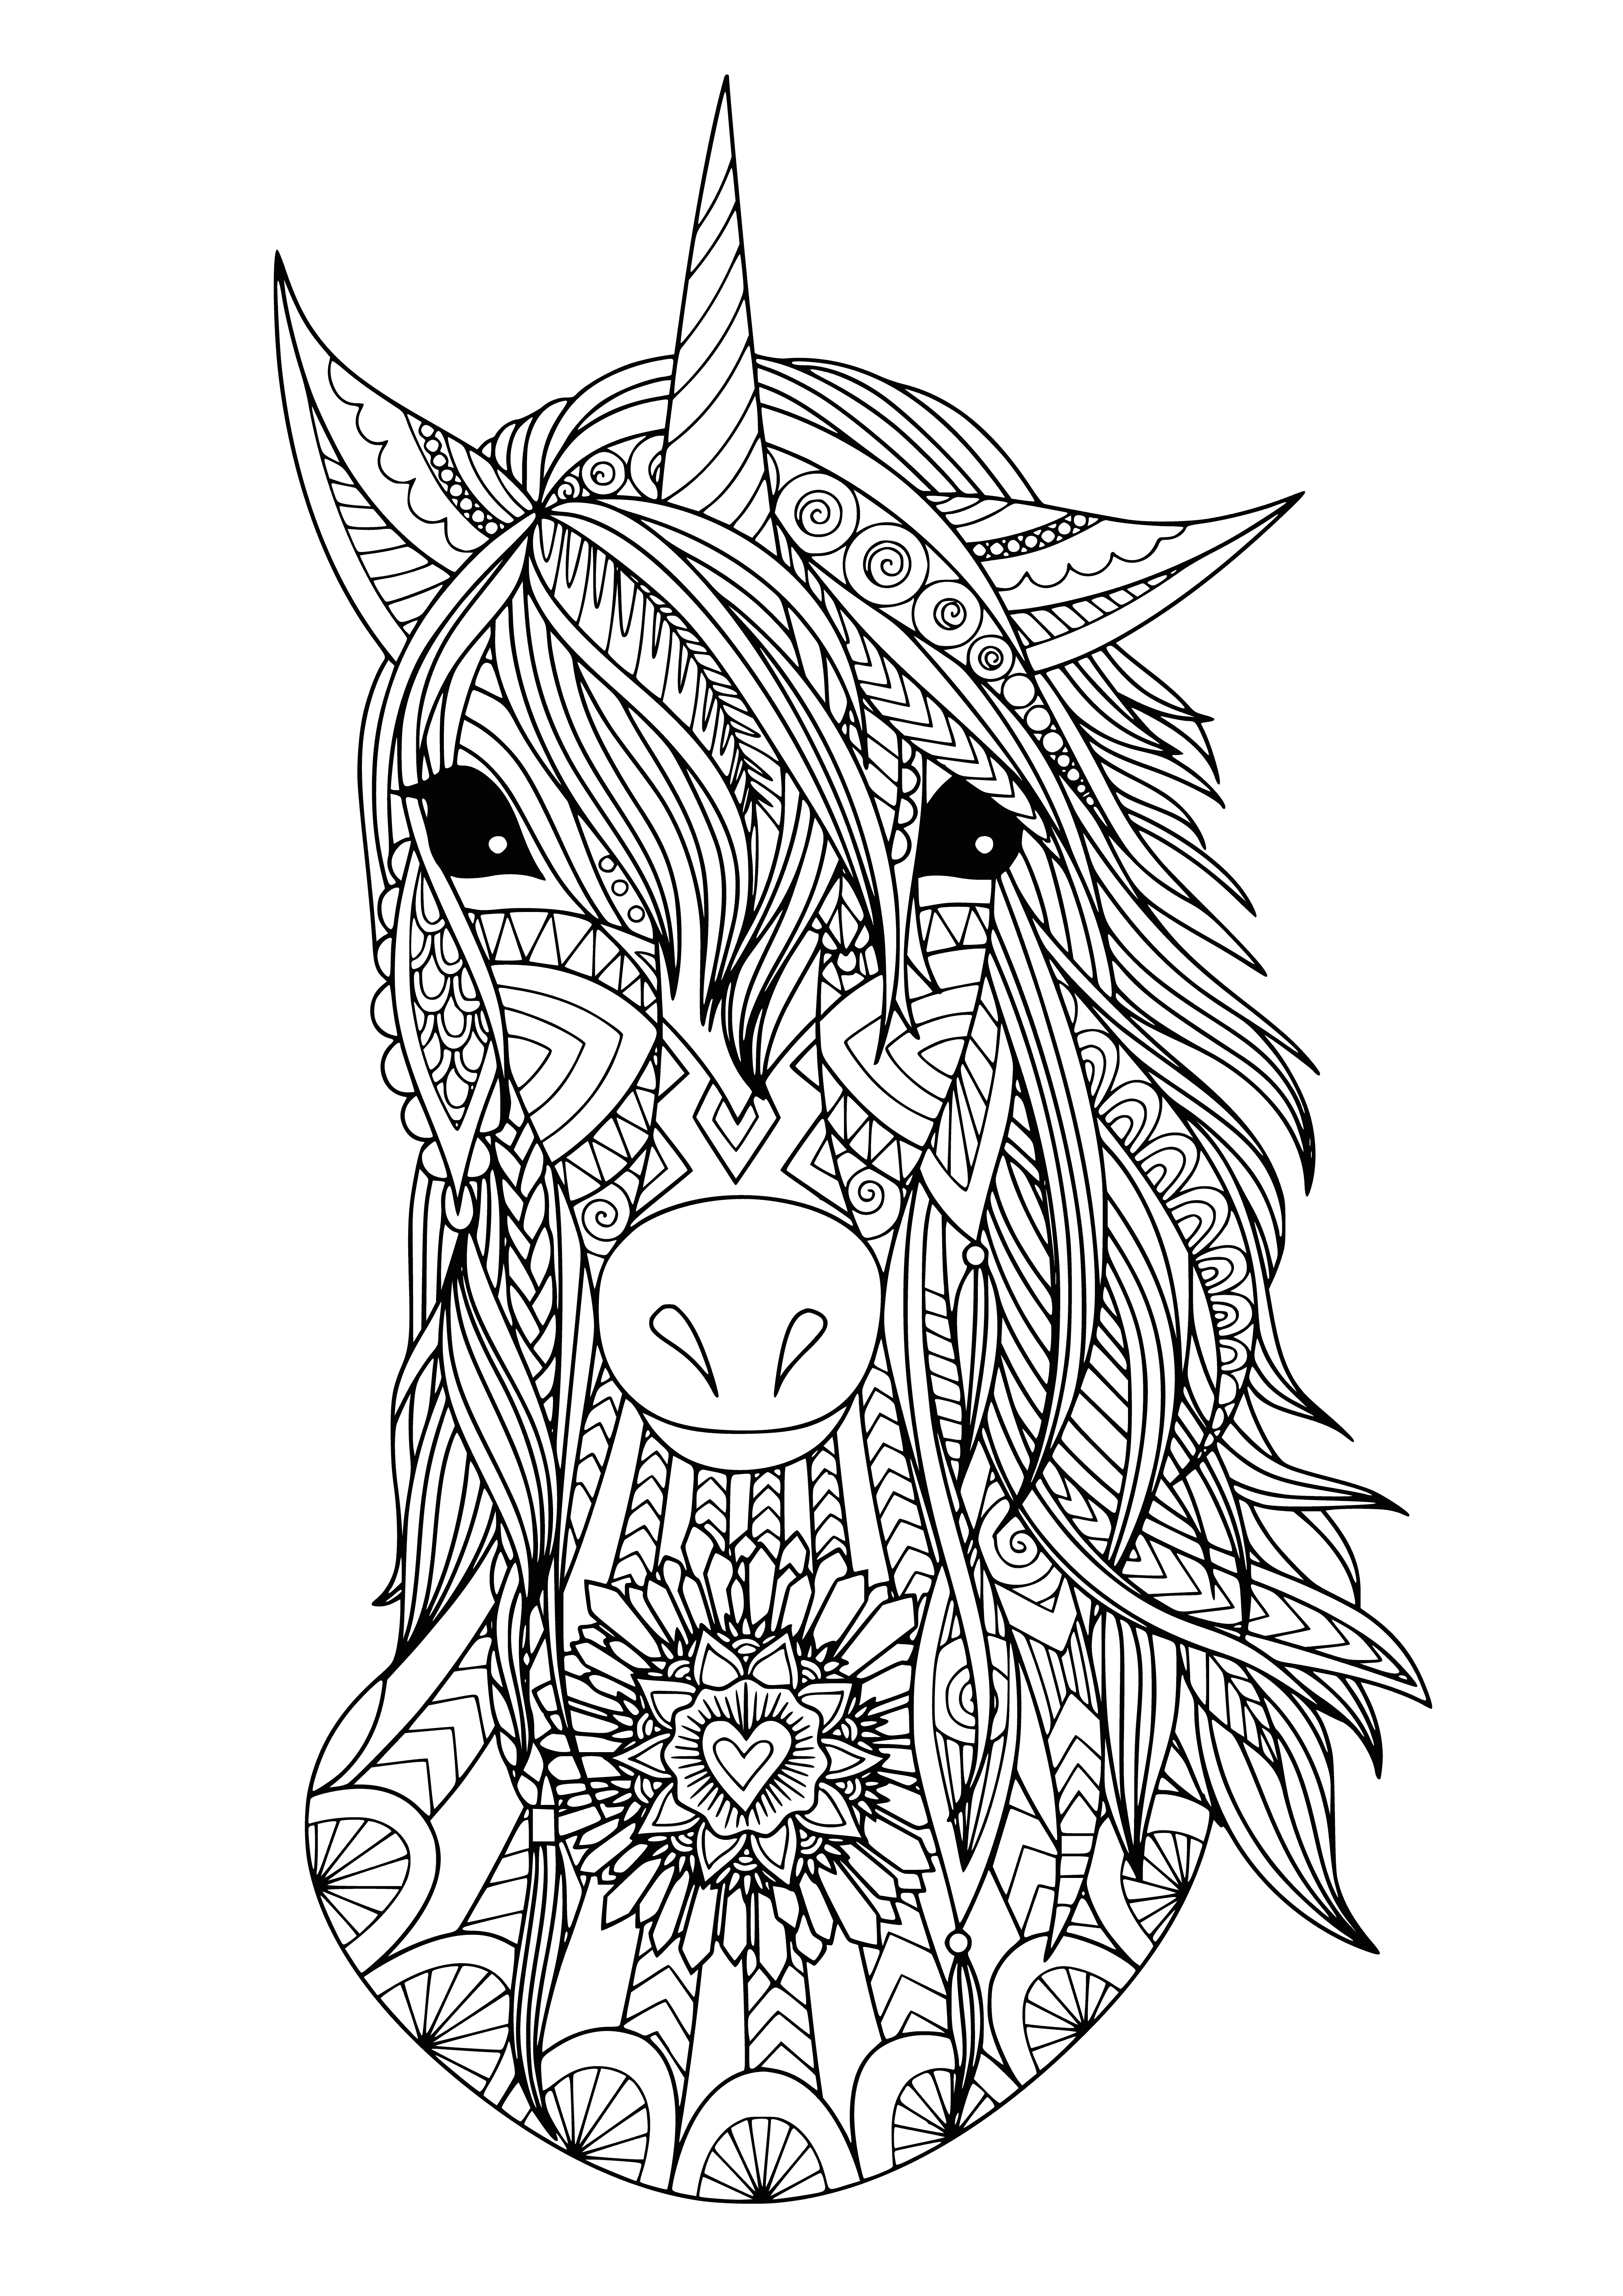 coloring page: Unicorn in a peaceful field, surrounded by flowers - perfect for relaxation & de-stressing!